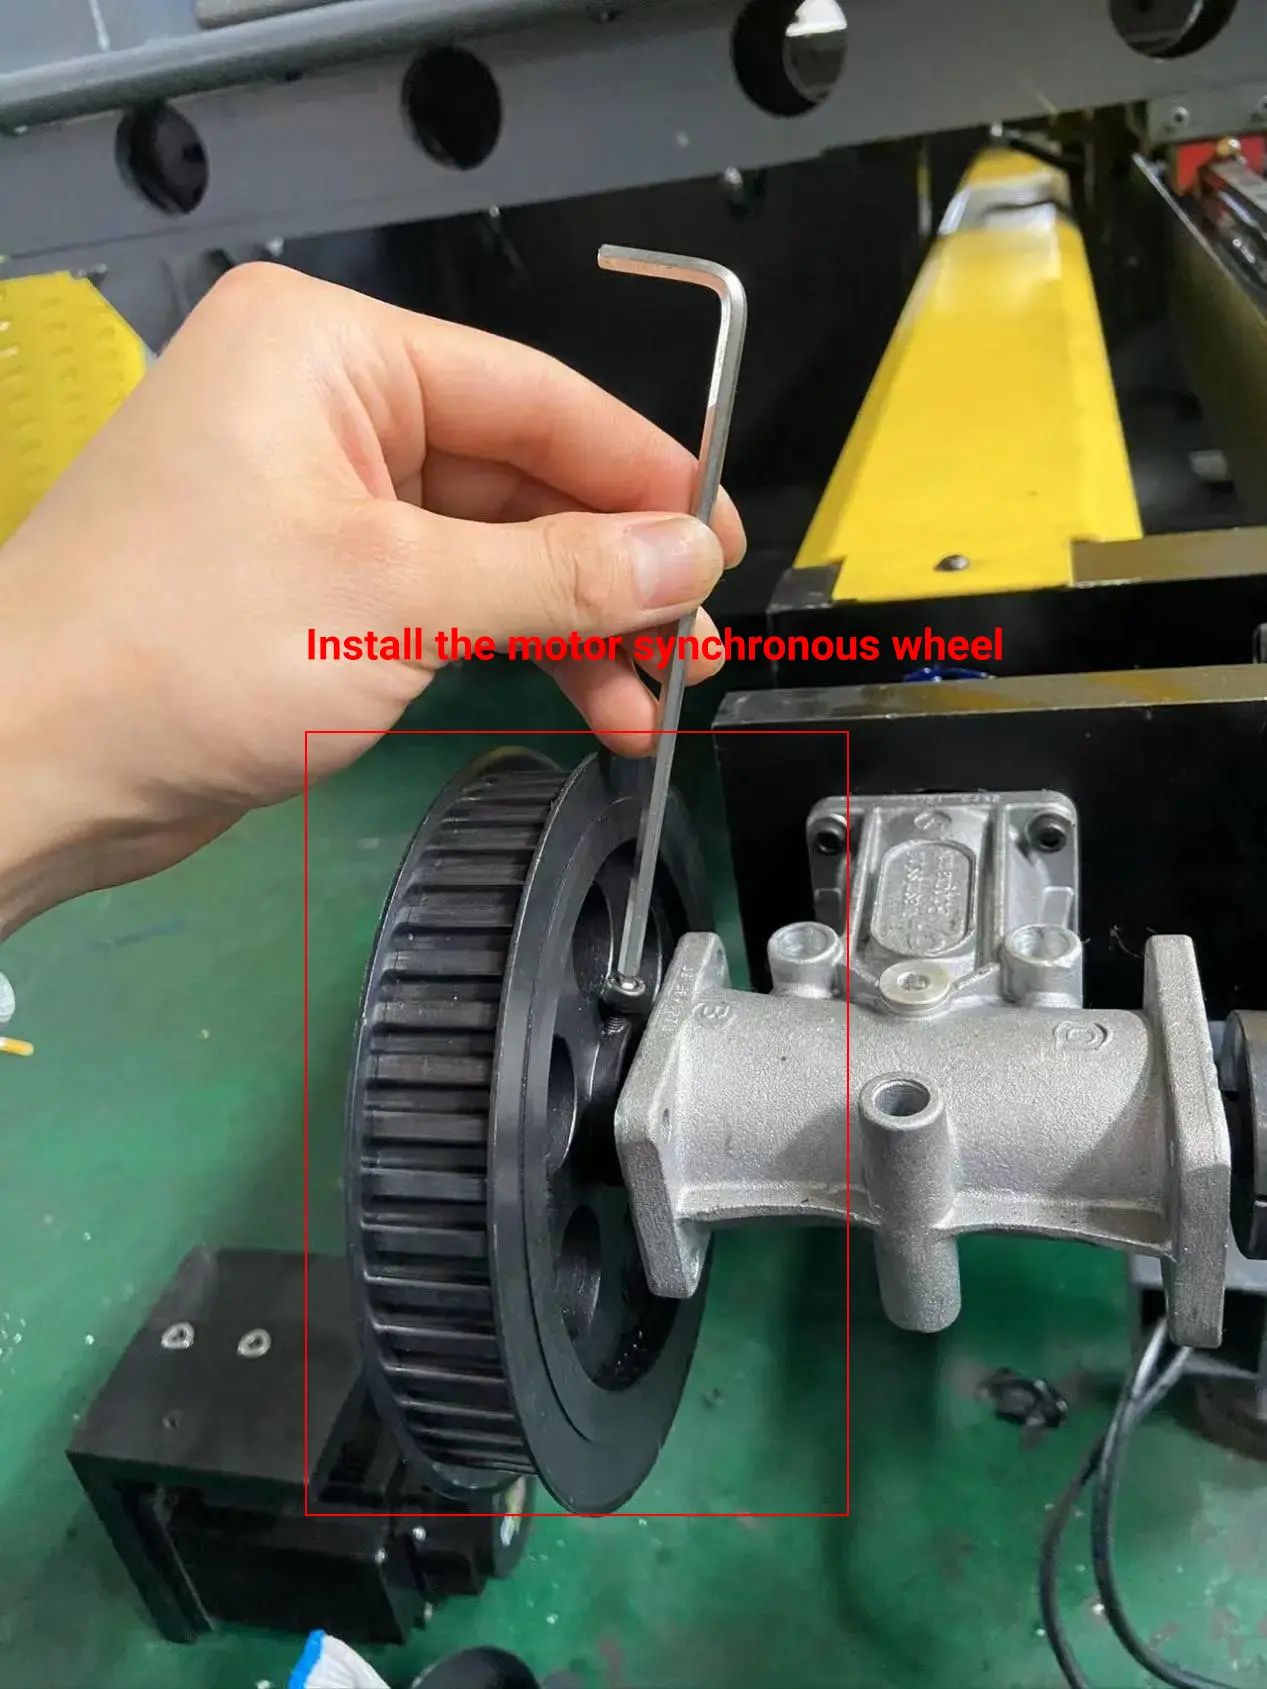 Install the motor synchronous wheel